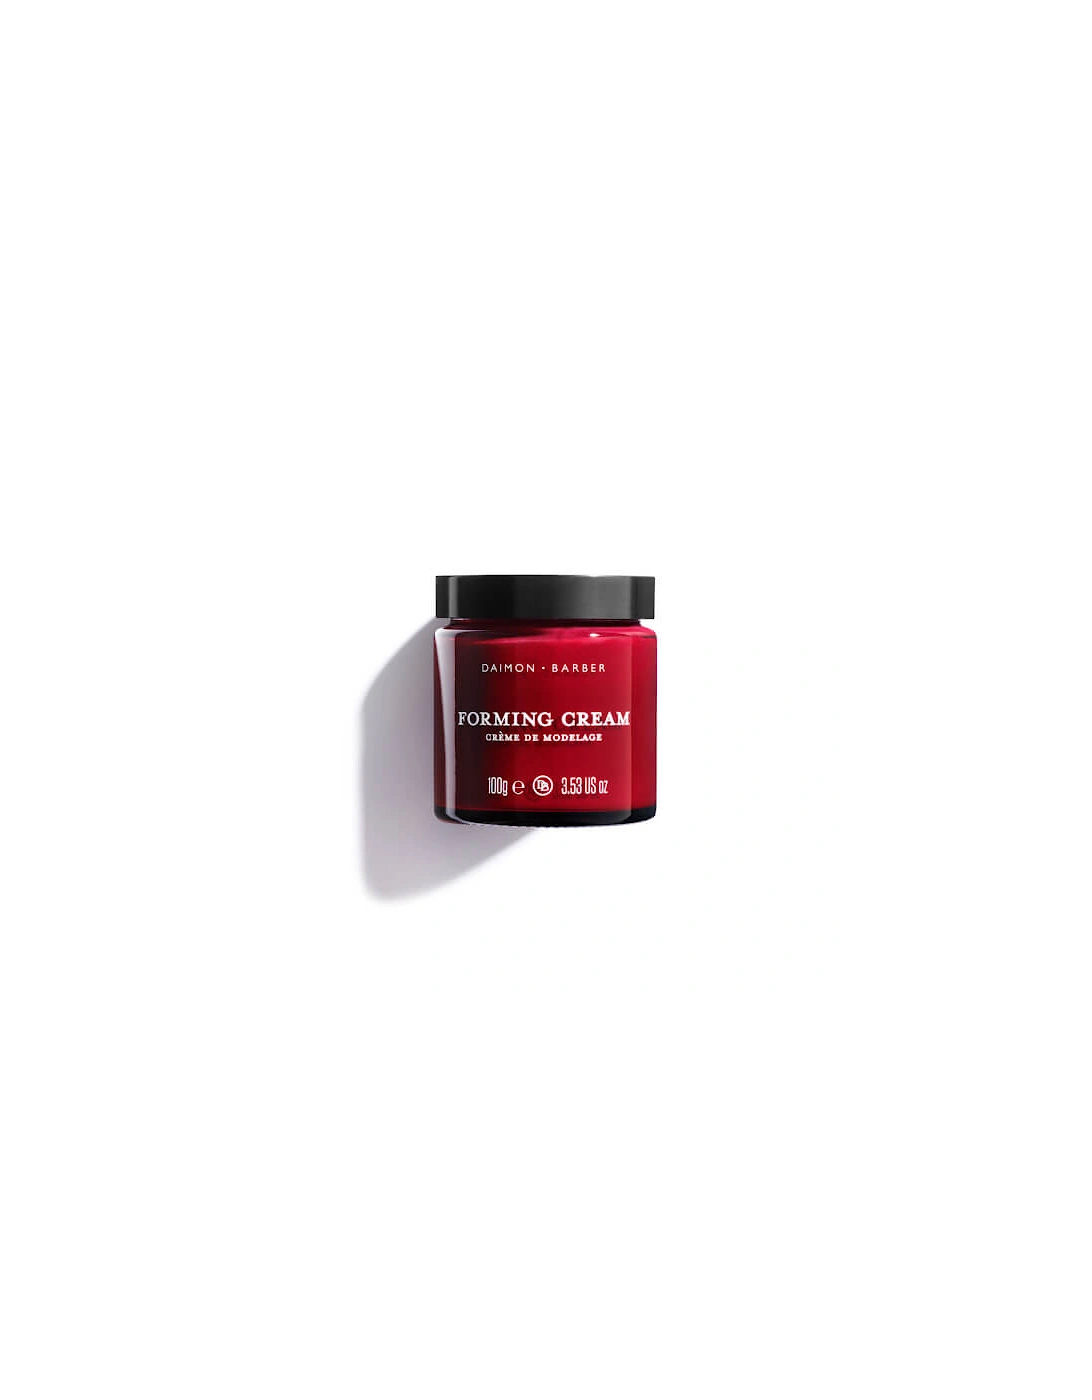 Forming Cream 100g - Daimon Barber, 2 of 1